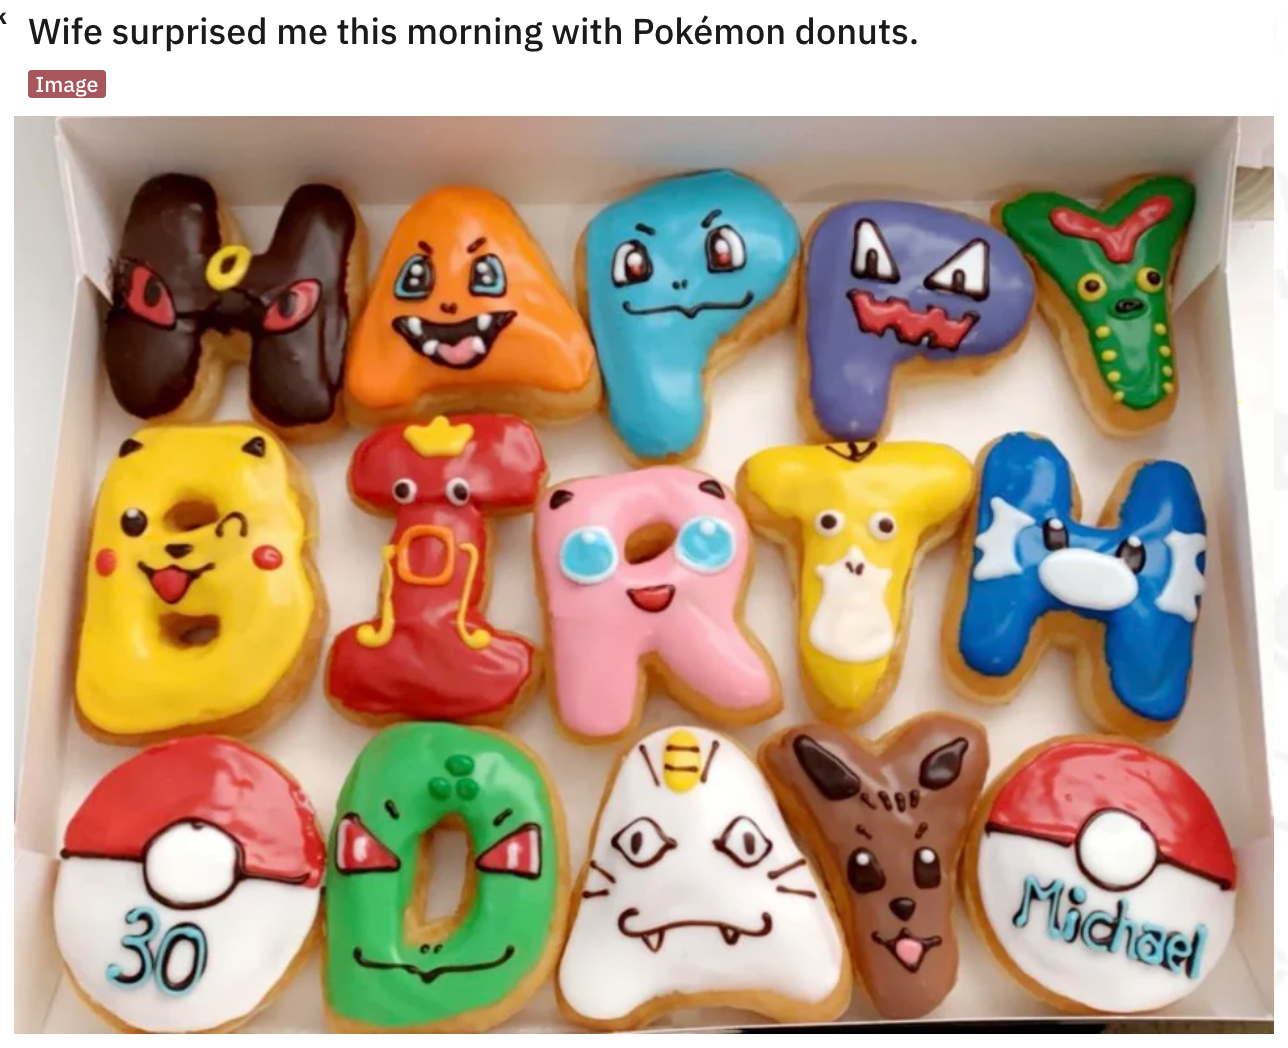 pokemon donuts happy birthday - Wife surprised me this morning with Pokmon donuts.